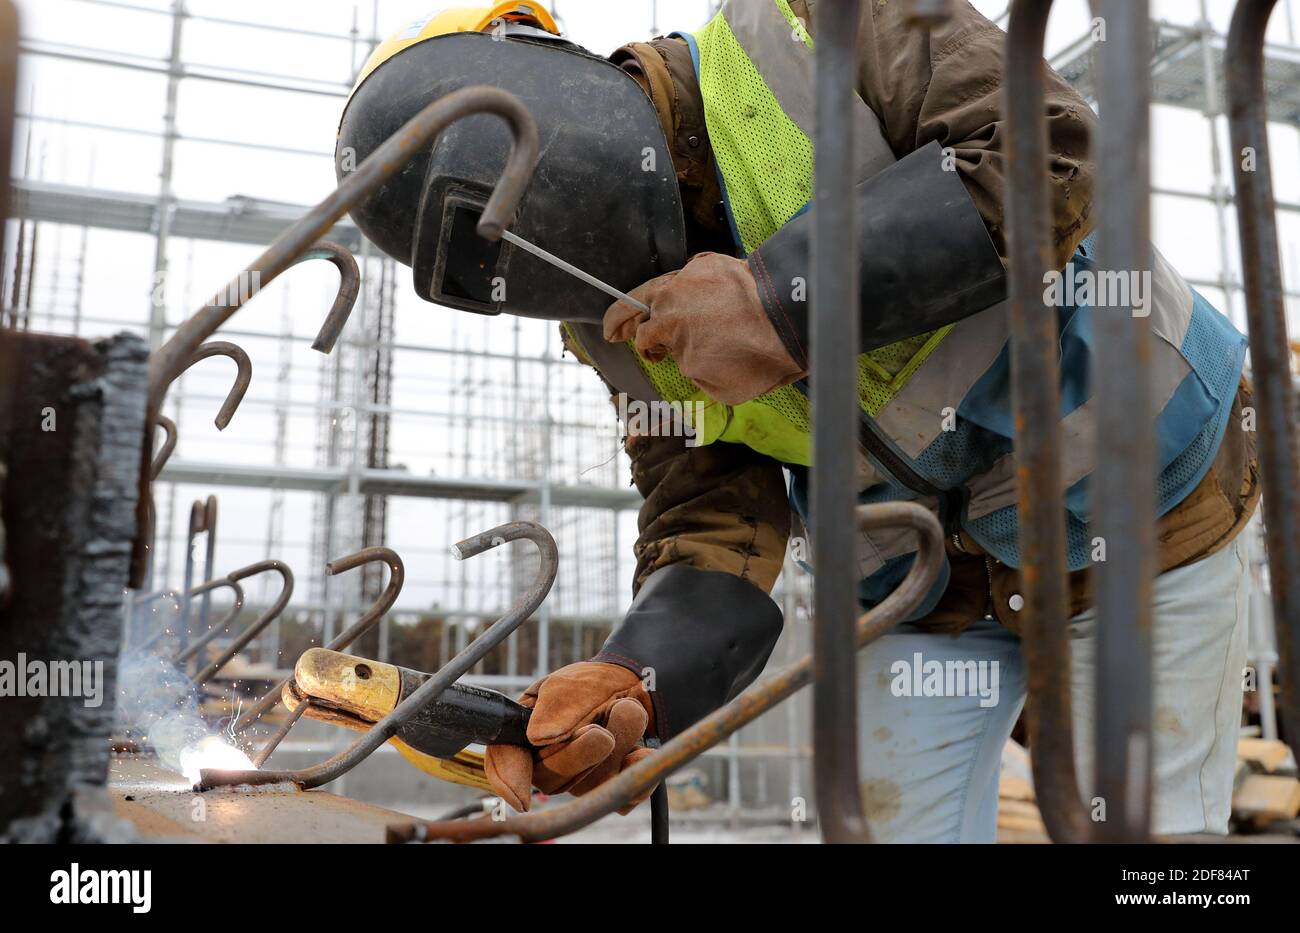 Shanghai. 2nd Dec, 2020. Zhang Xingfa operates a welding gun at a construction site in east China's Shanghai Municipality, Dec. 2, 2020. Zhang Xingfa, 54, is an experienced welder currently working at a construction site in the Lingang Special Area in Shanghai. He accidentally had a first-hand experience with the art of cross-stitch years ago, and could never break away since then. Zhang takes great pleasure in cross-stitch, and sees the similarity between his hobby and his profession - they both command a lot of patience and precision. Credit: Fang Zhe/Xinhua/Alamy Live News Stock Photo